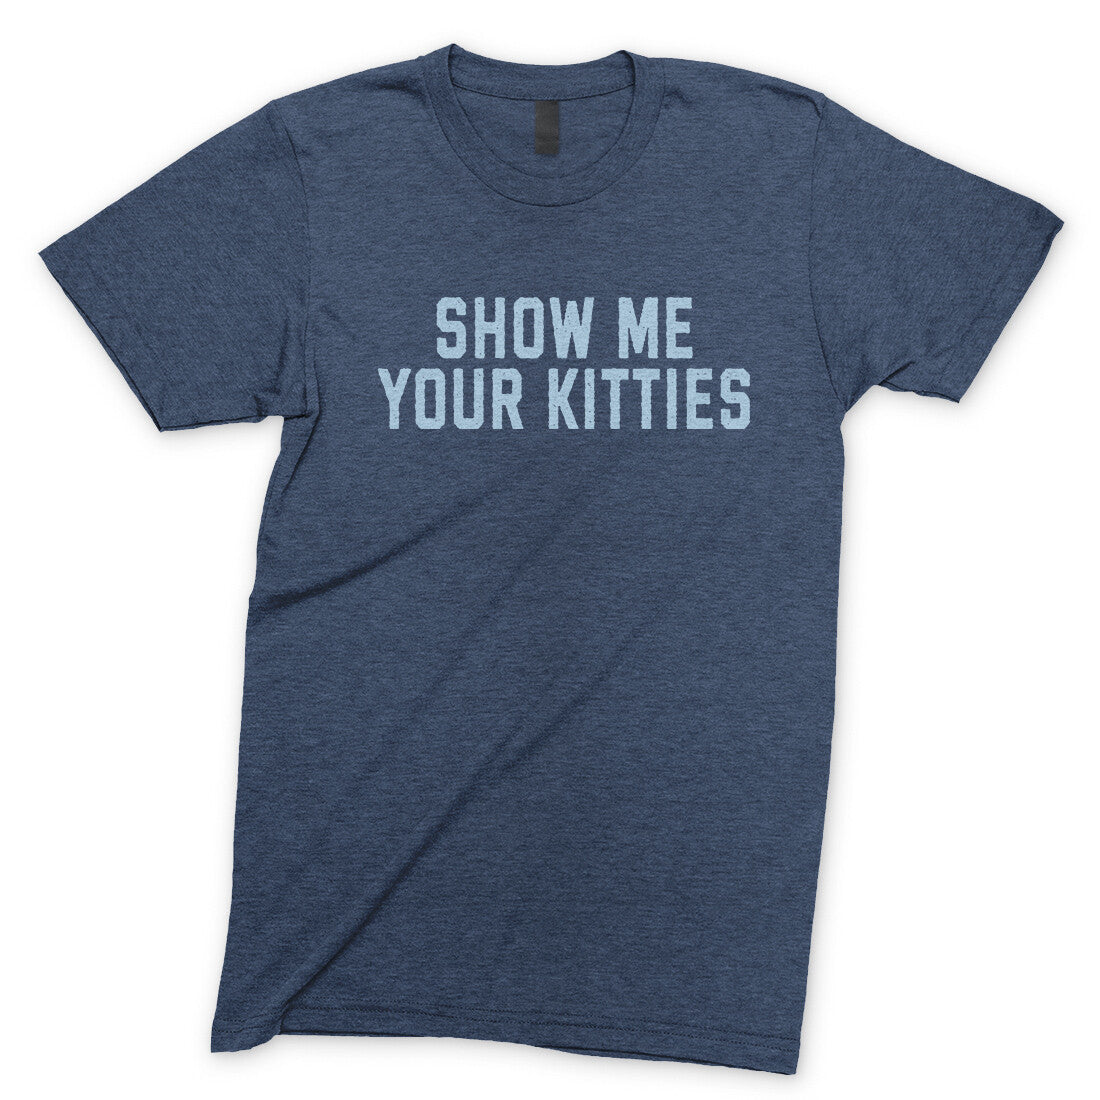 Show me Your Kitties in Navy Heather Color